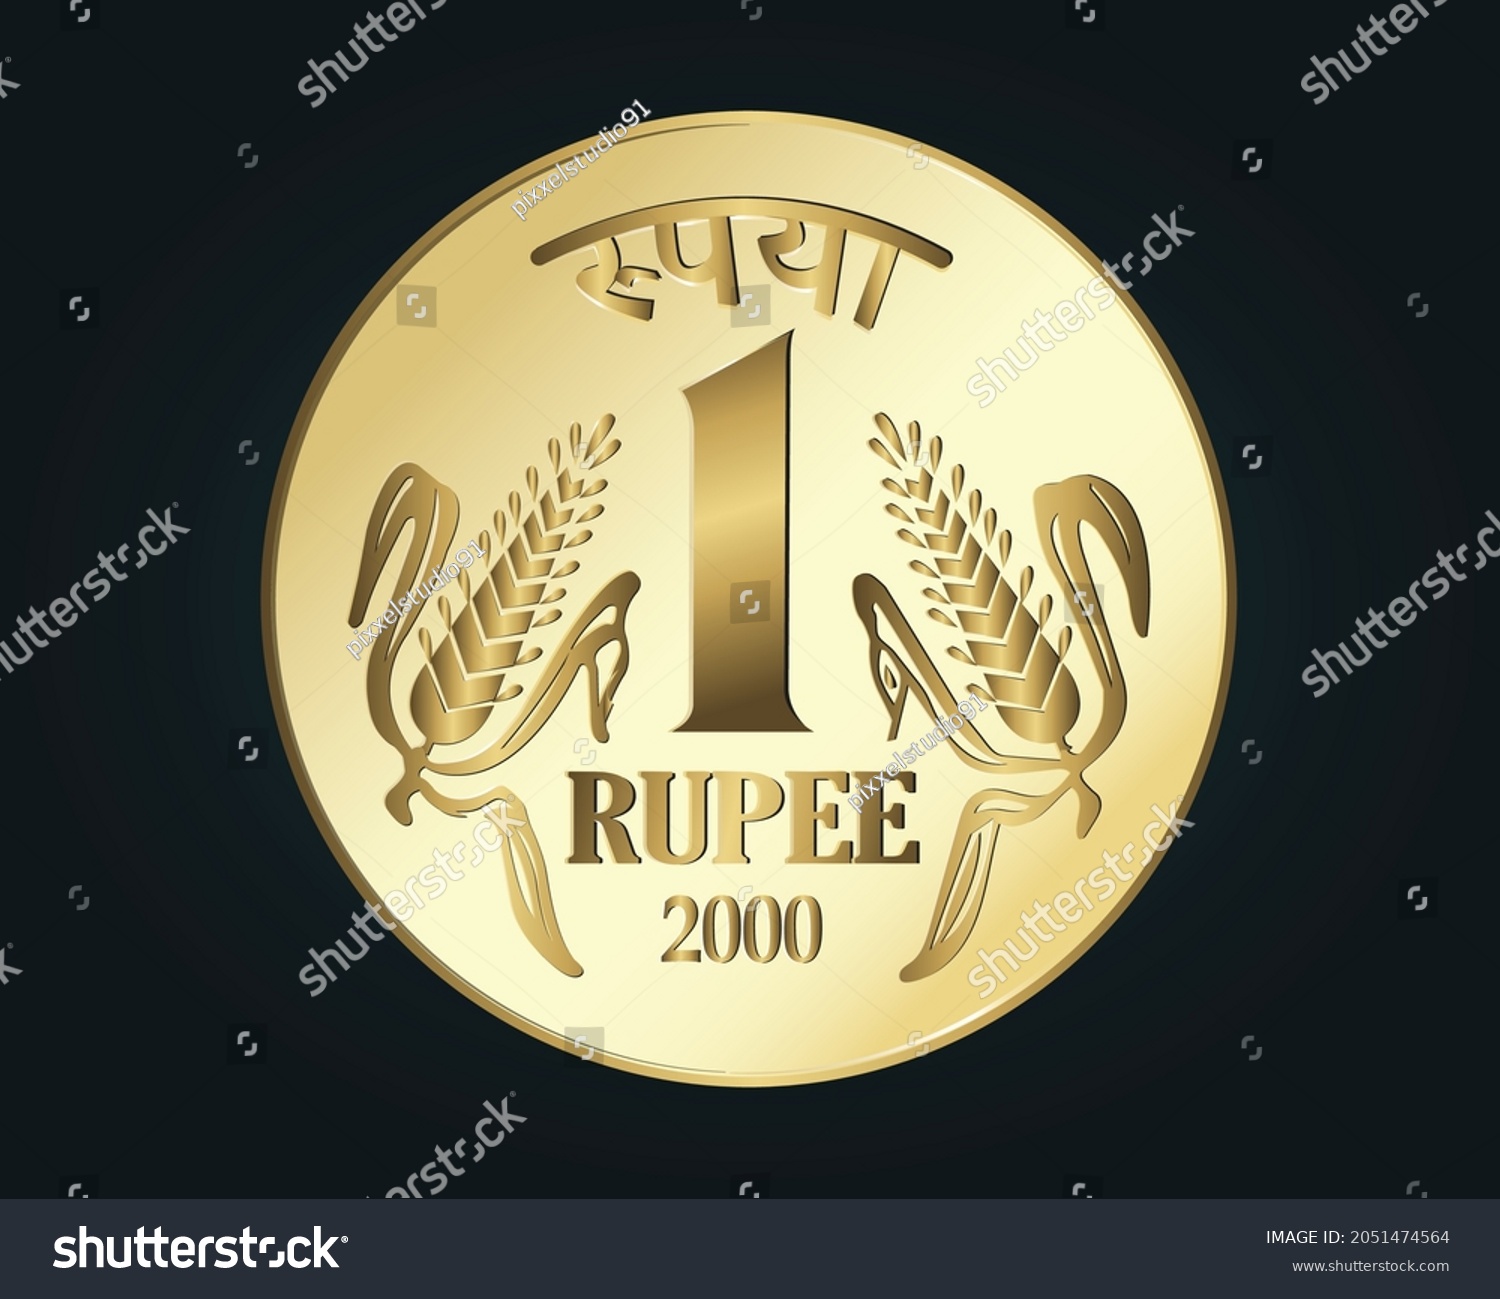 SVG of one rupee coin,  golden rupee icon isolated on dark background, realistic vector symbol svg